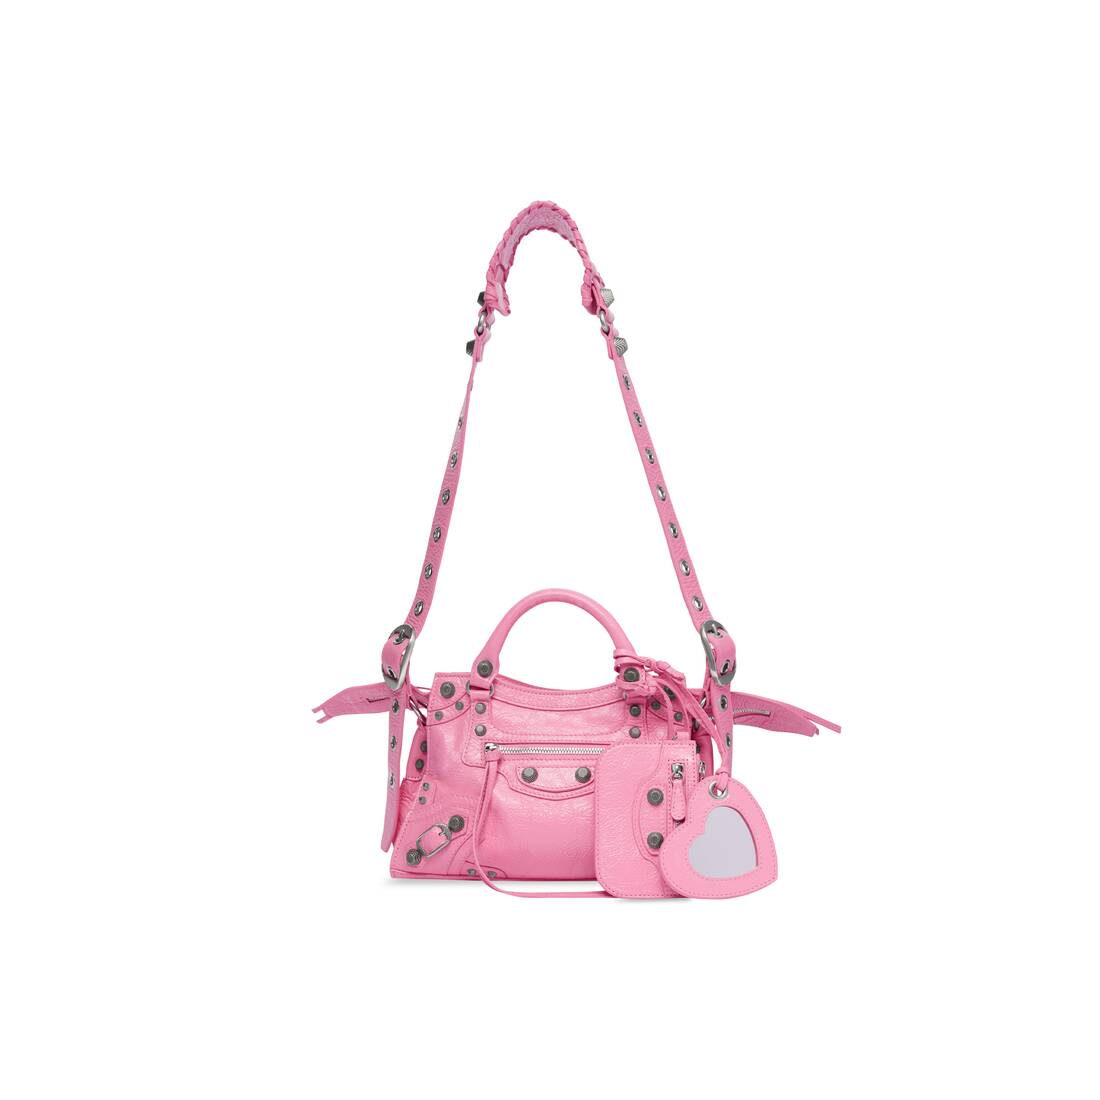 Where to Buy Balenciaga Icons Bag XS in Hot Pink, Nylon and leather shoulder  bag